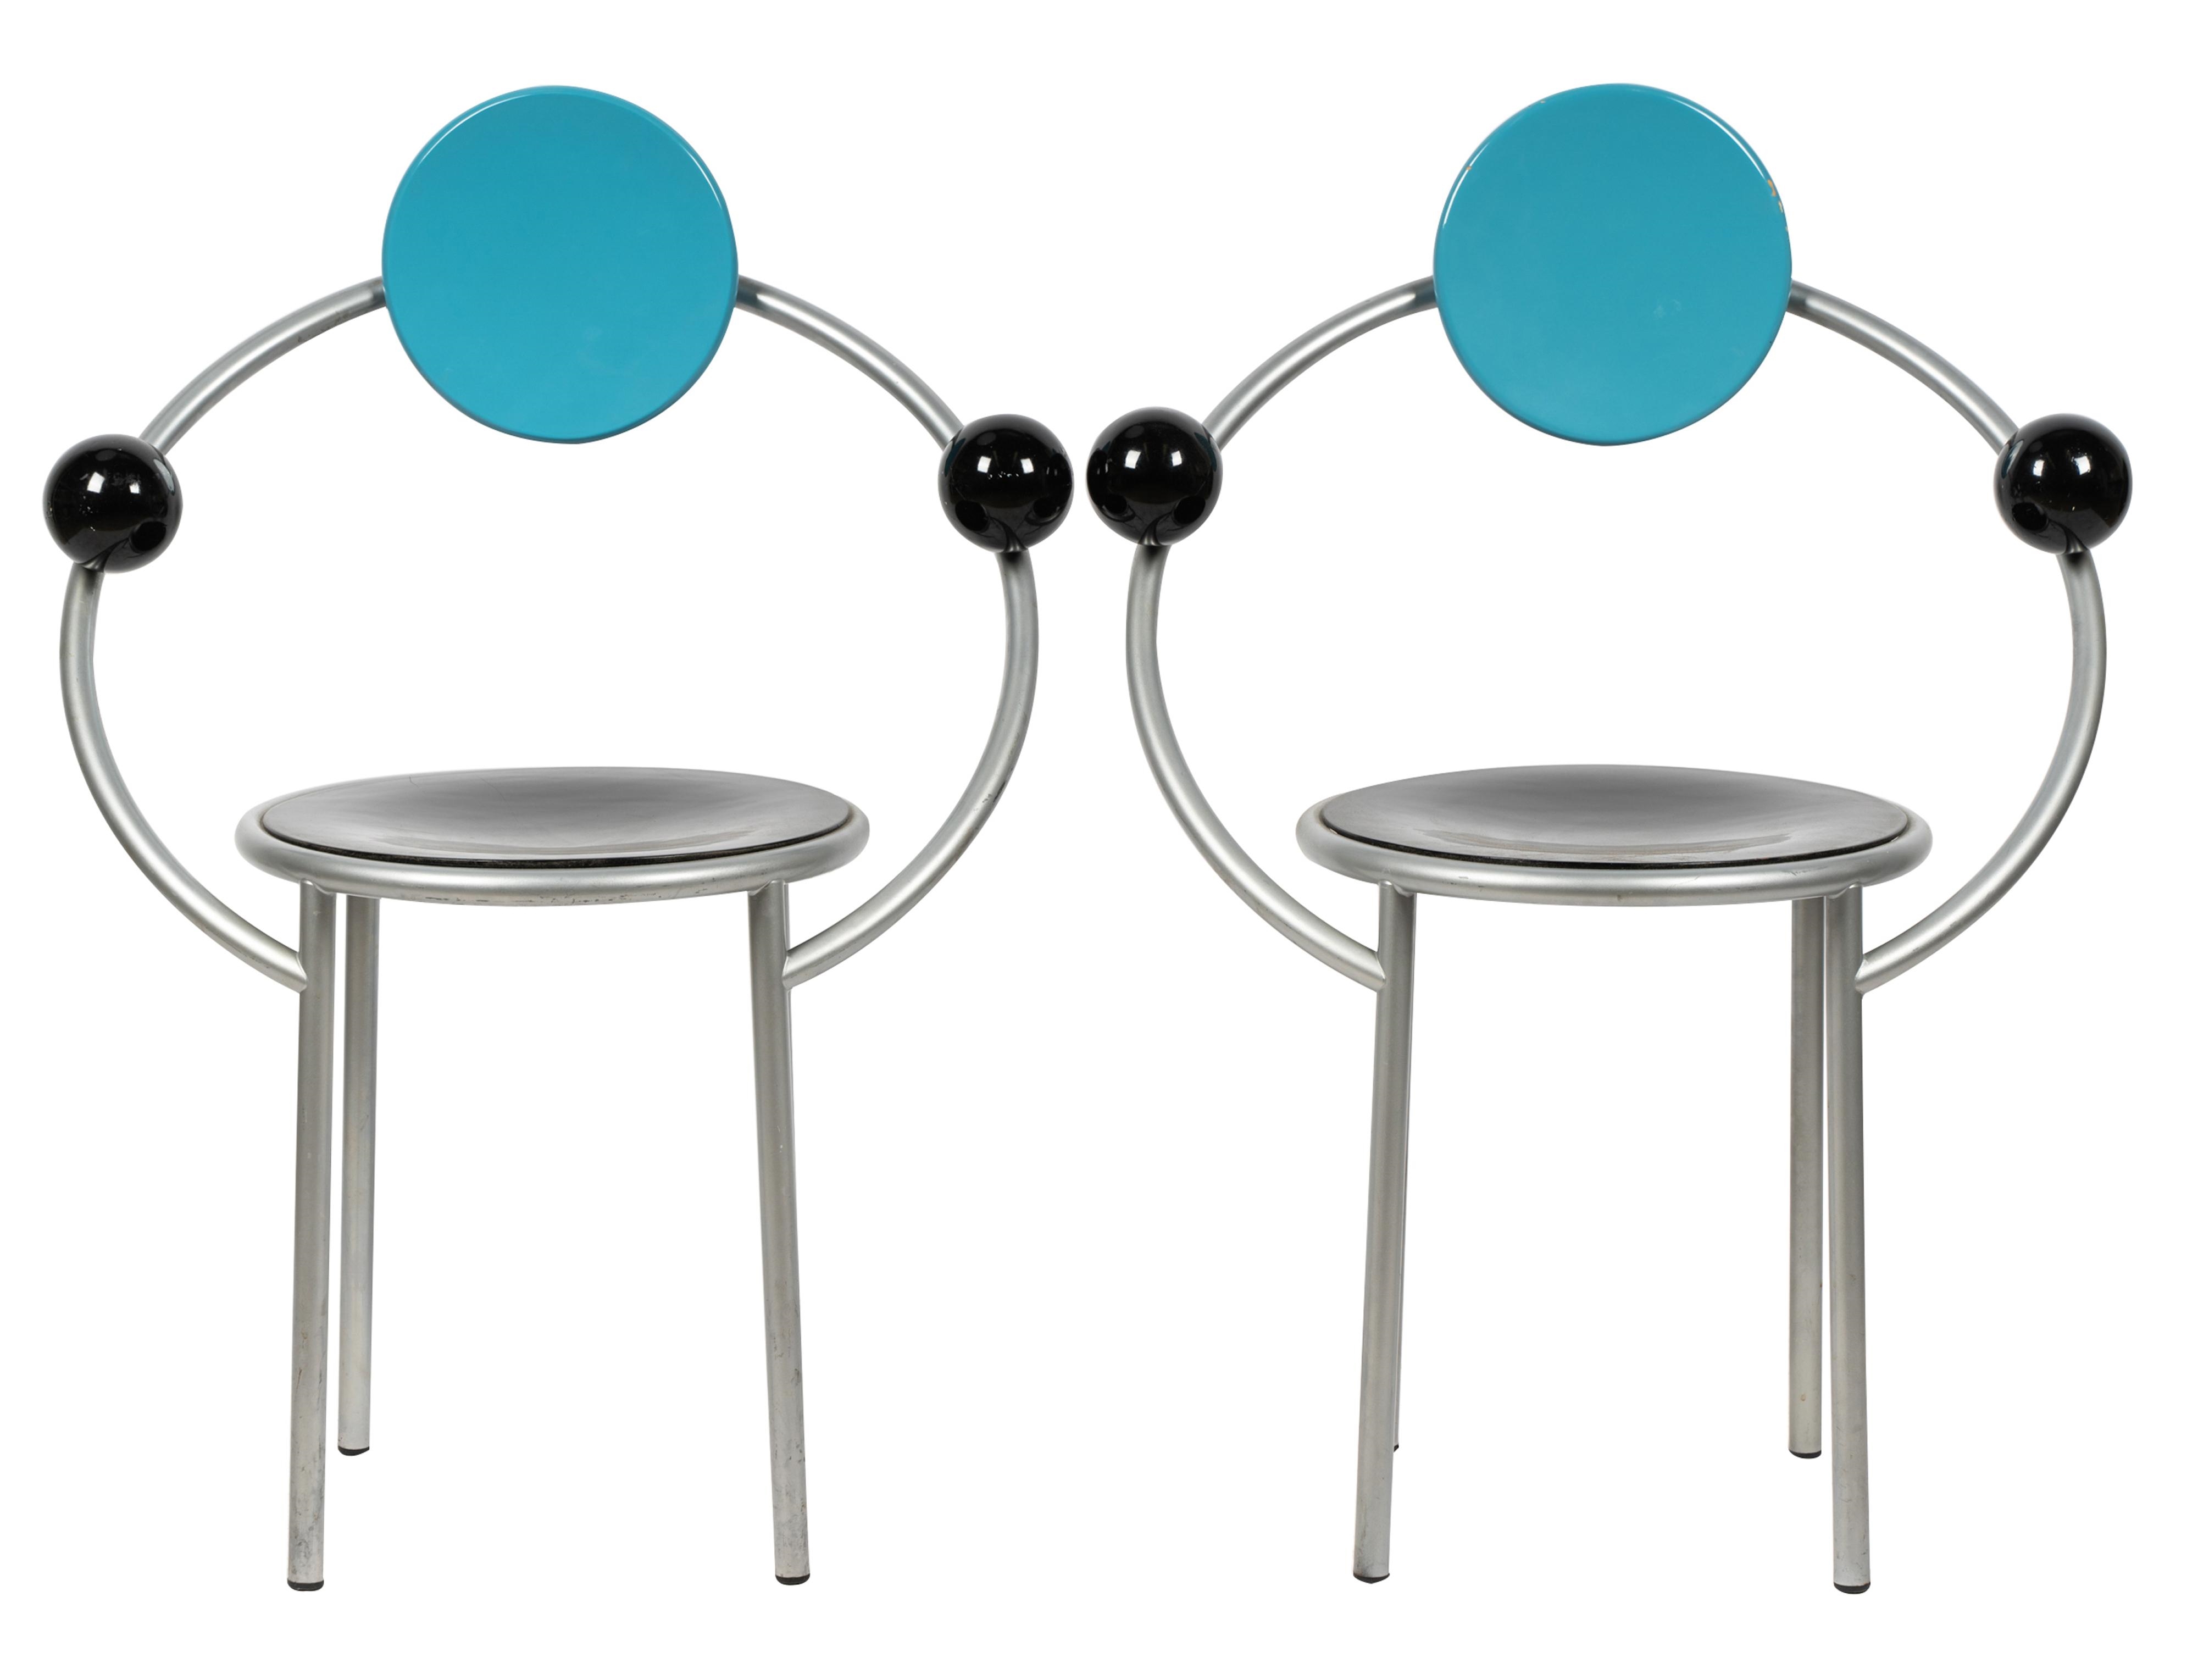 PAIR OF "FIRST" CHAIRS by Michele de Lucchi